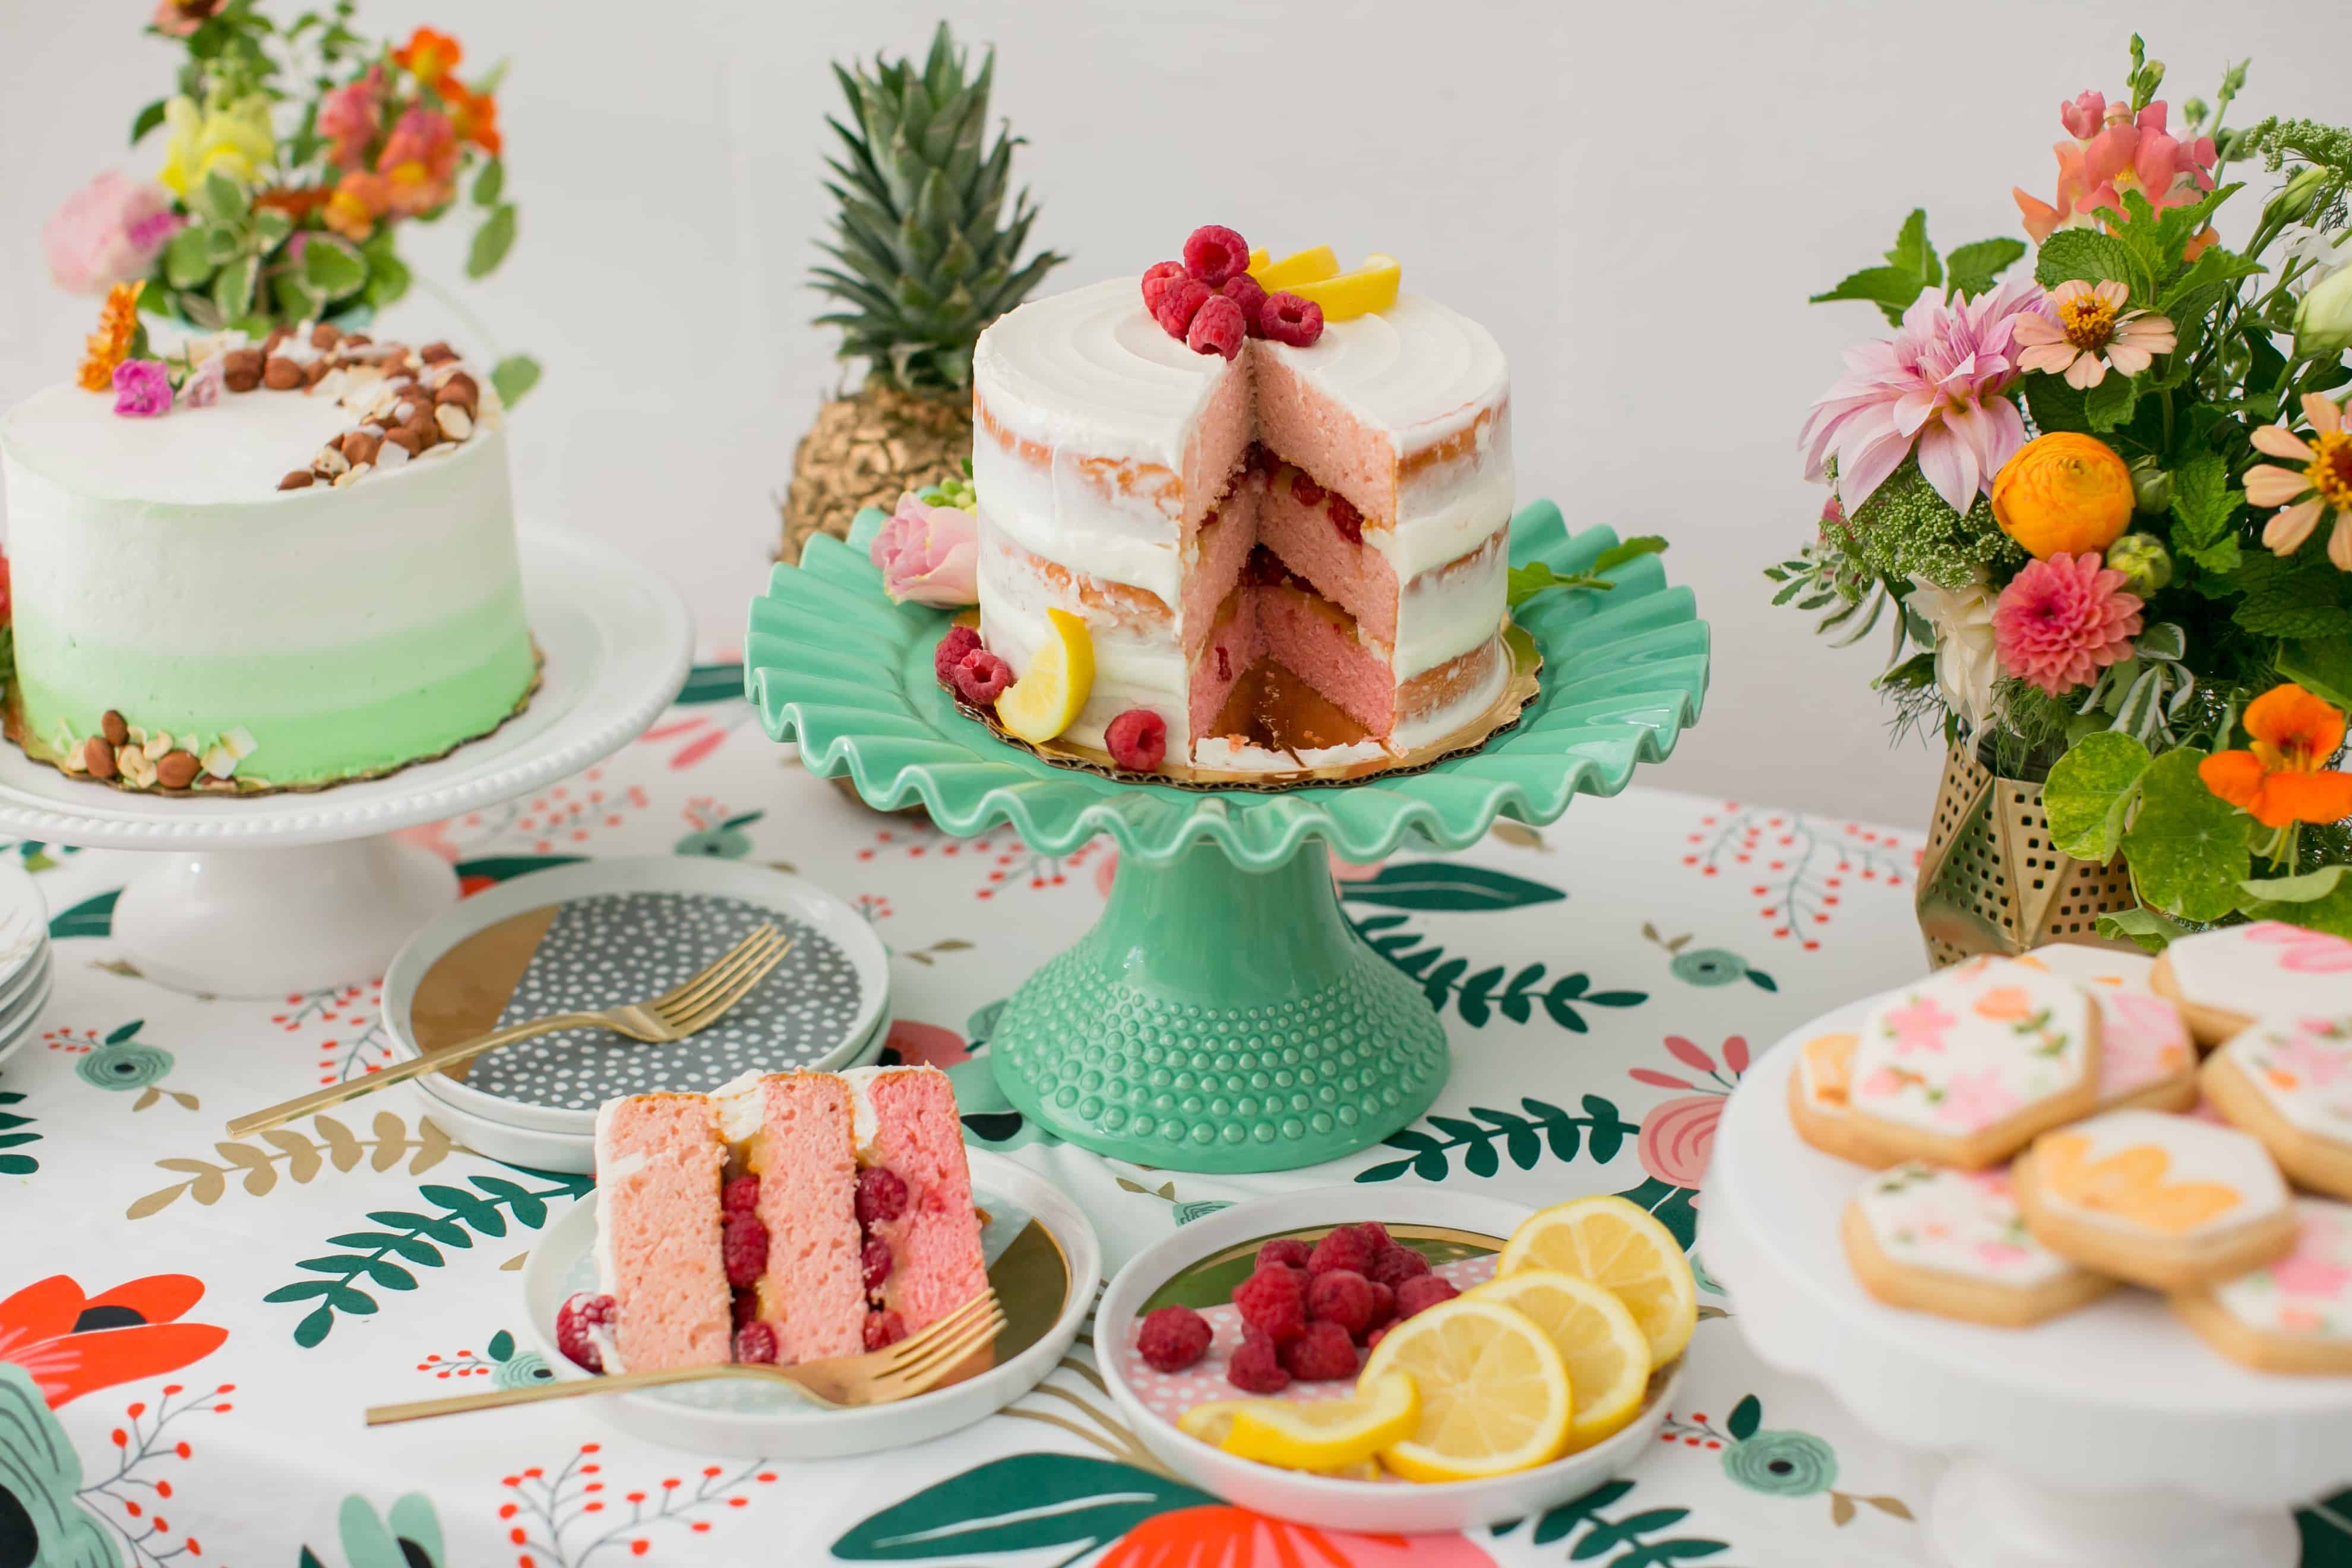 Why not surprise your friends and guests with a sweet & tart Raspberry Lemonade Cake for a #SummerFloralParty!